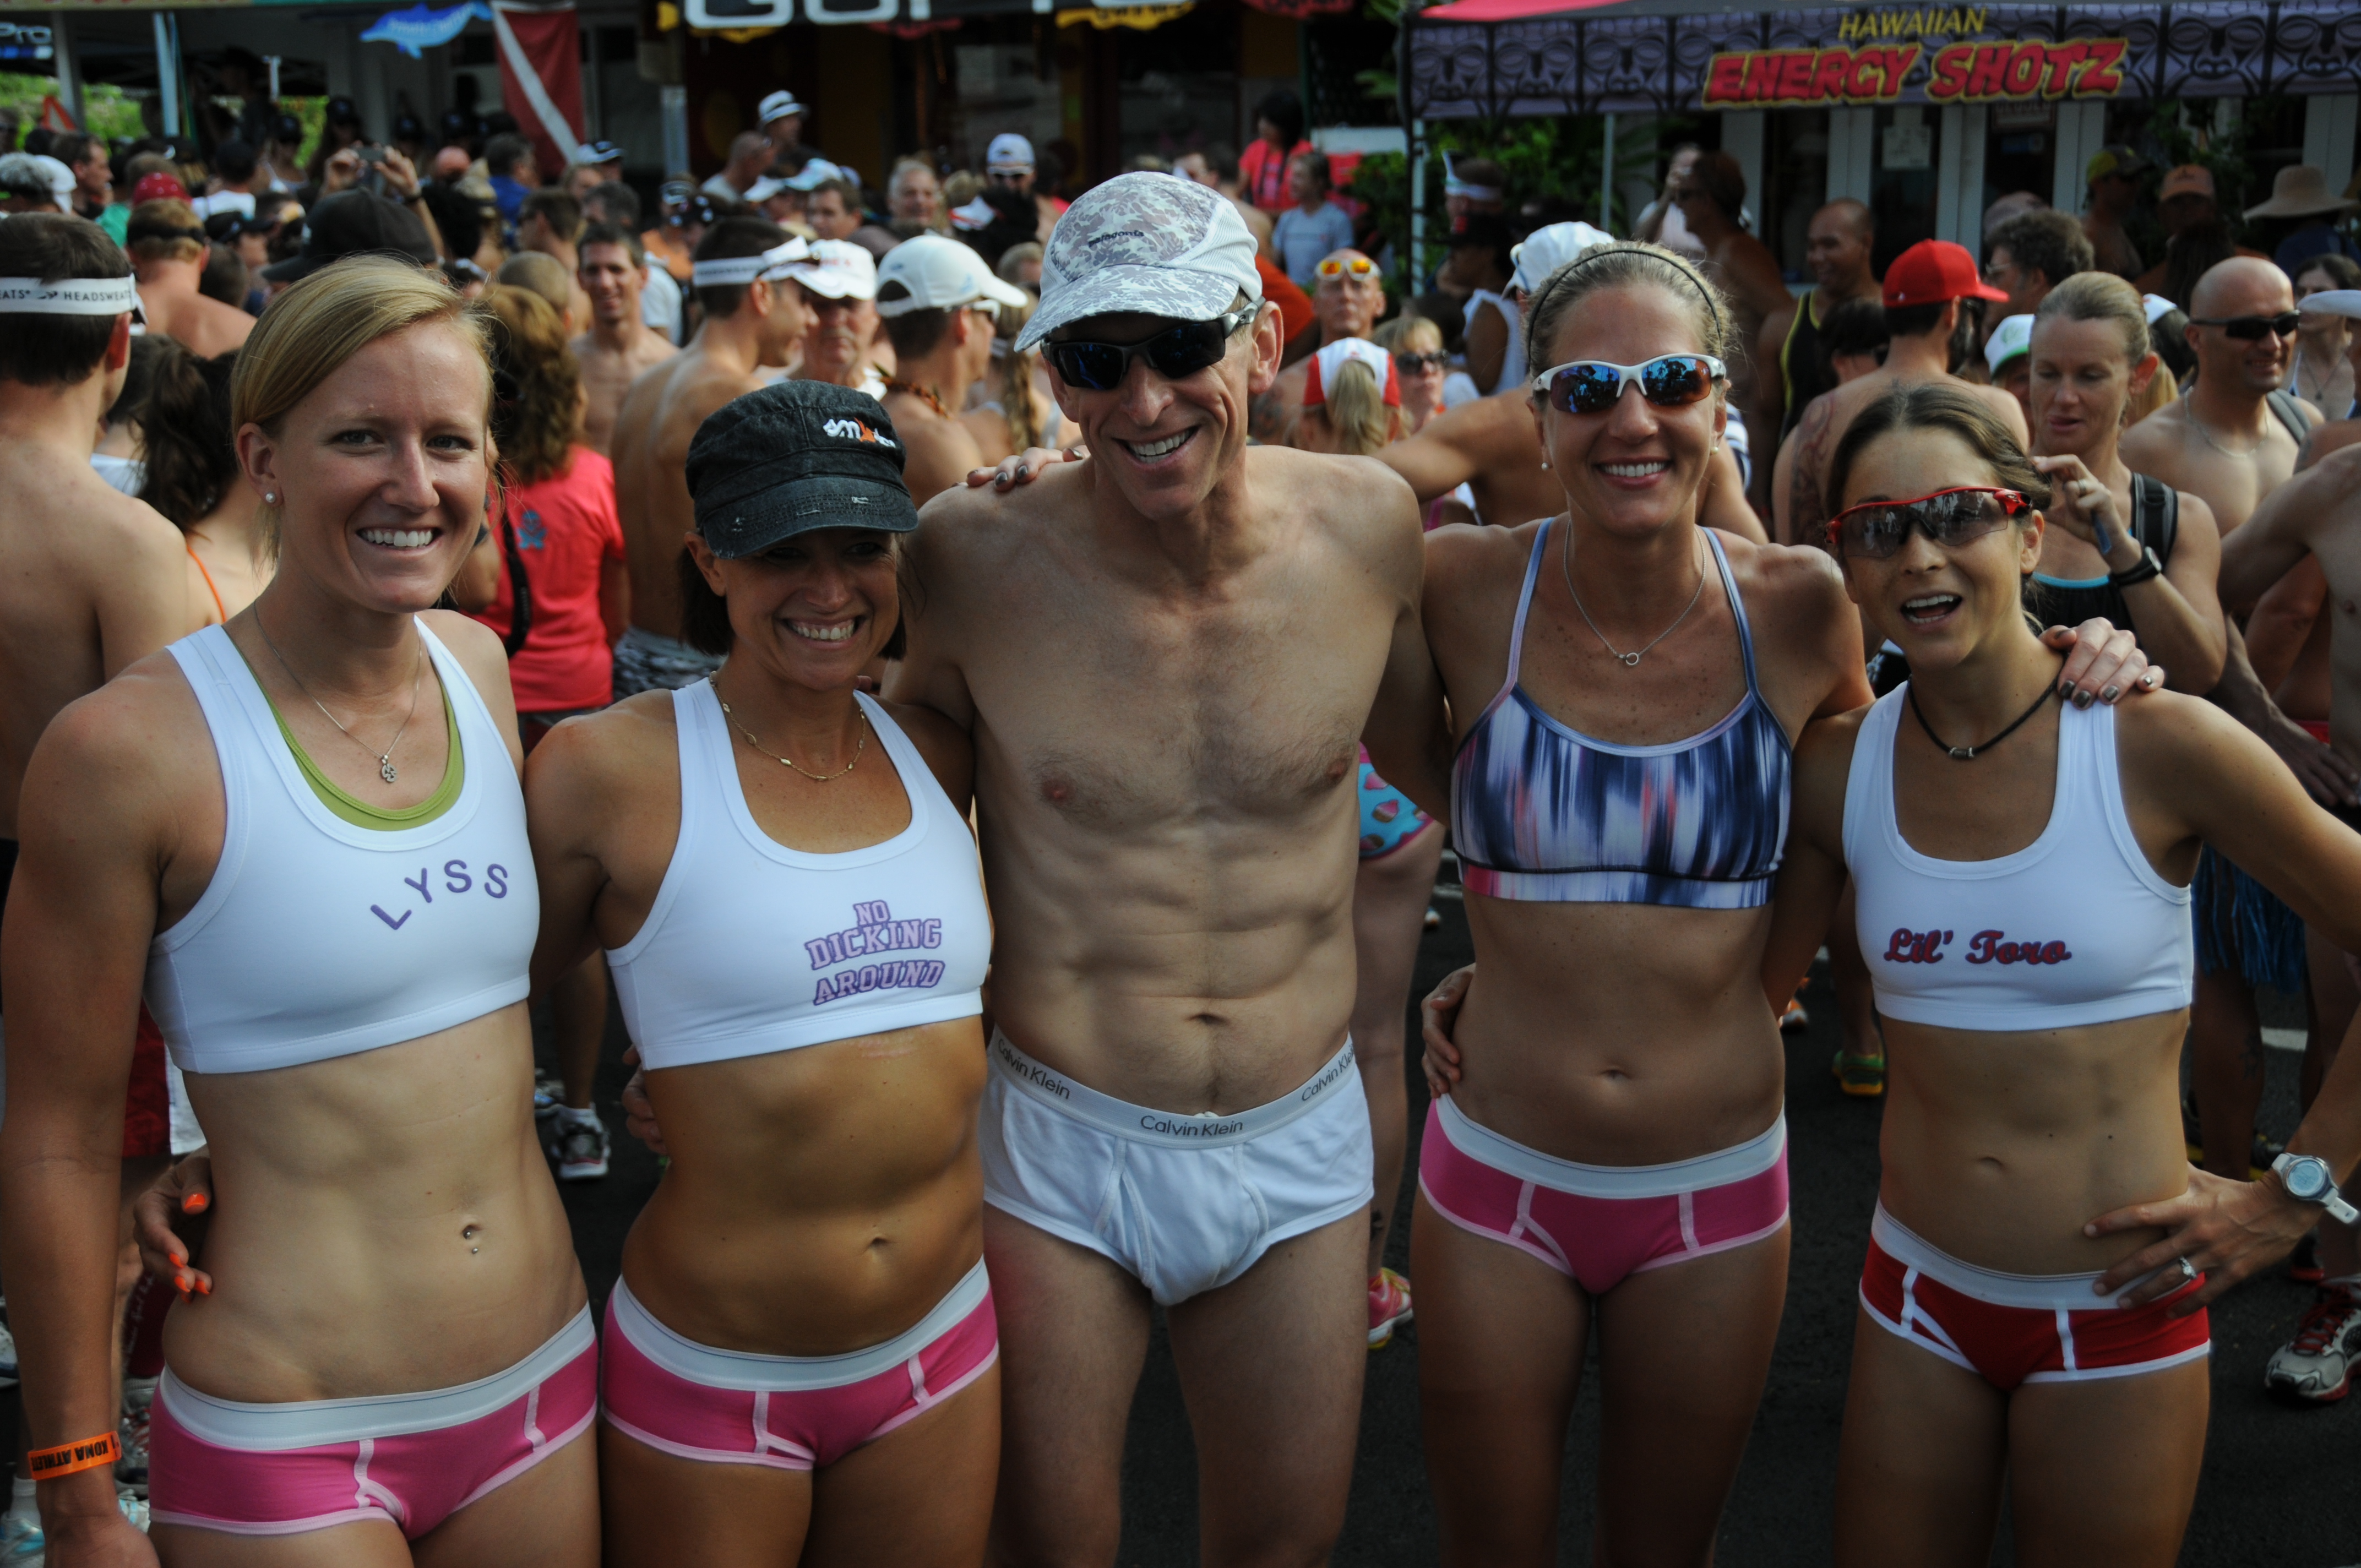 At 8:00 a.m. a huge thong throng showed up in downtown Kona in their underp...